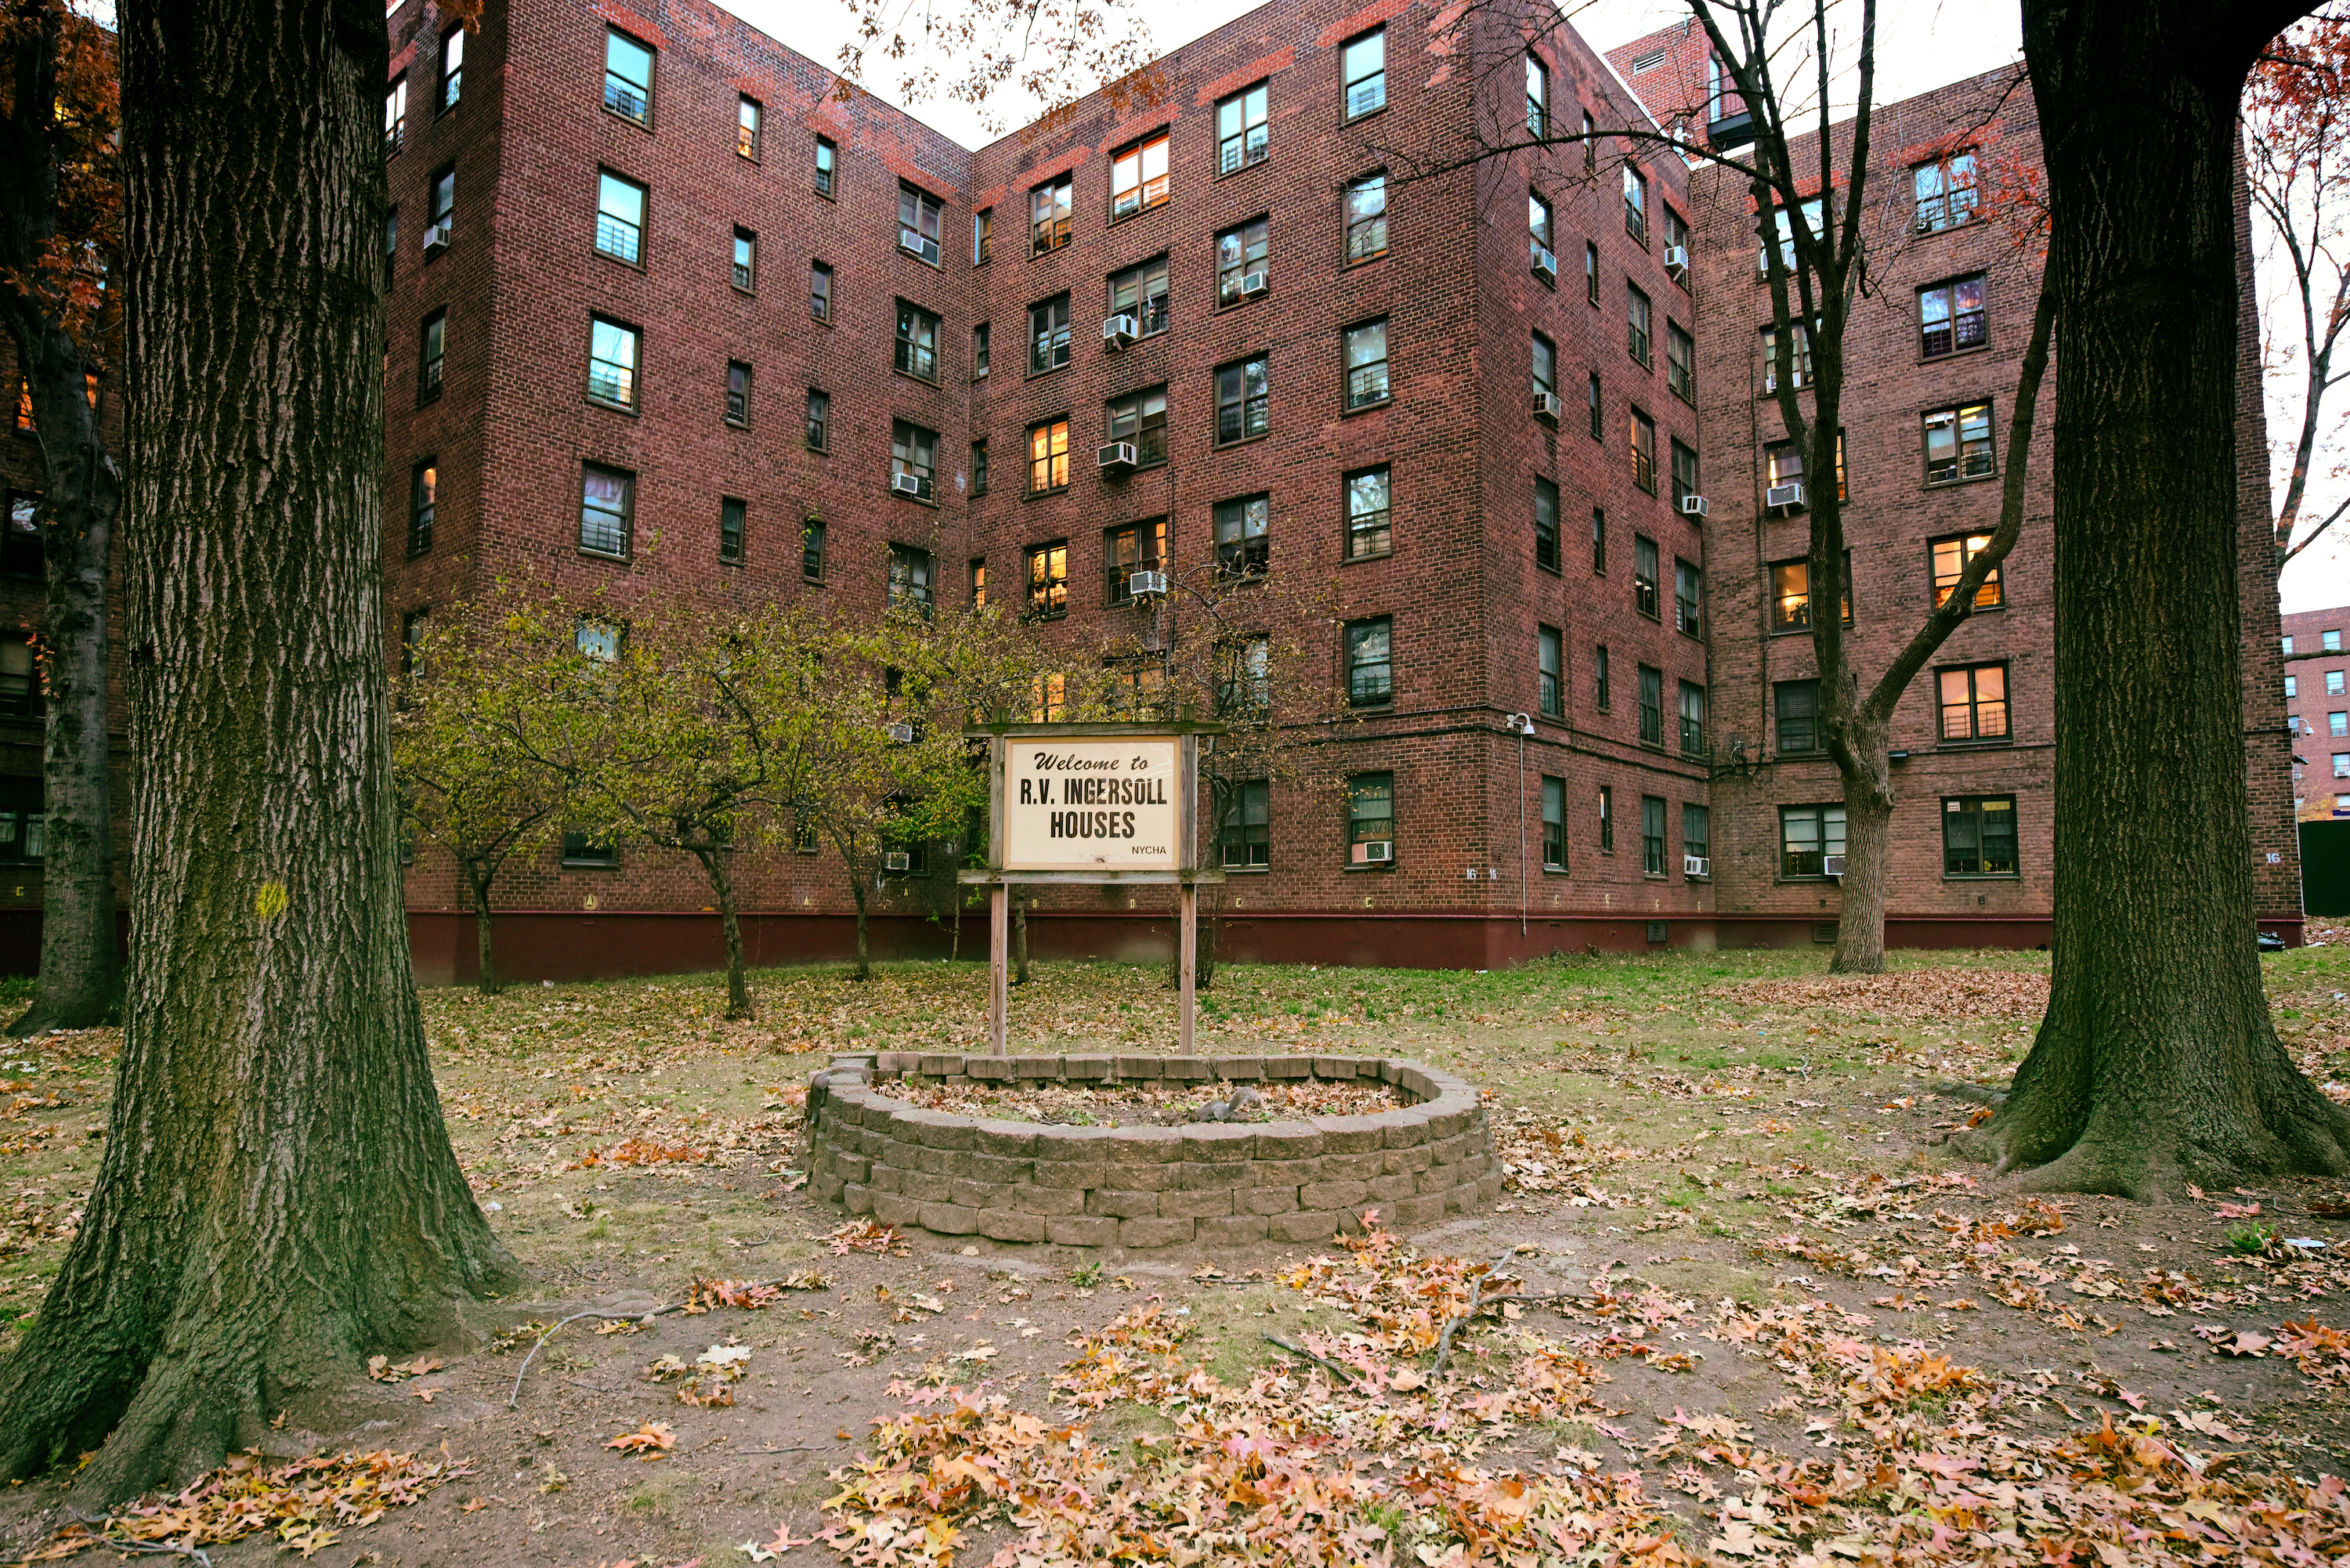 A six-story brick NYCHA building surrounded by trees and an “Ingersoll Houses” sign